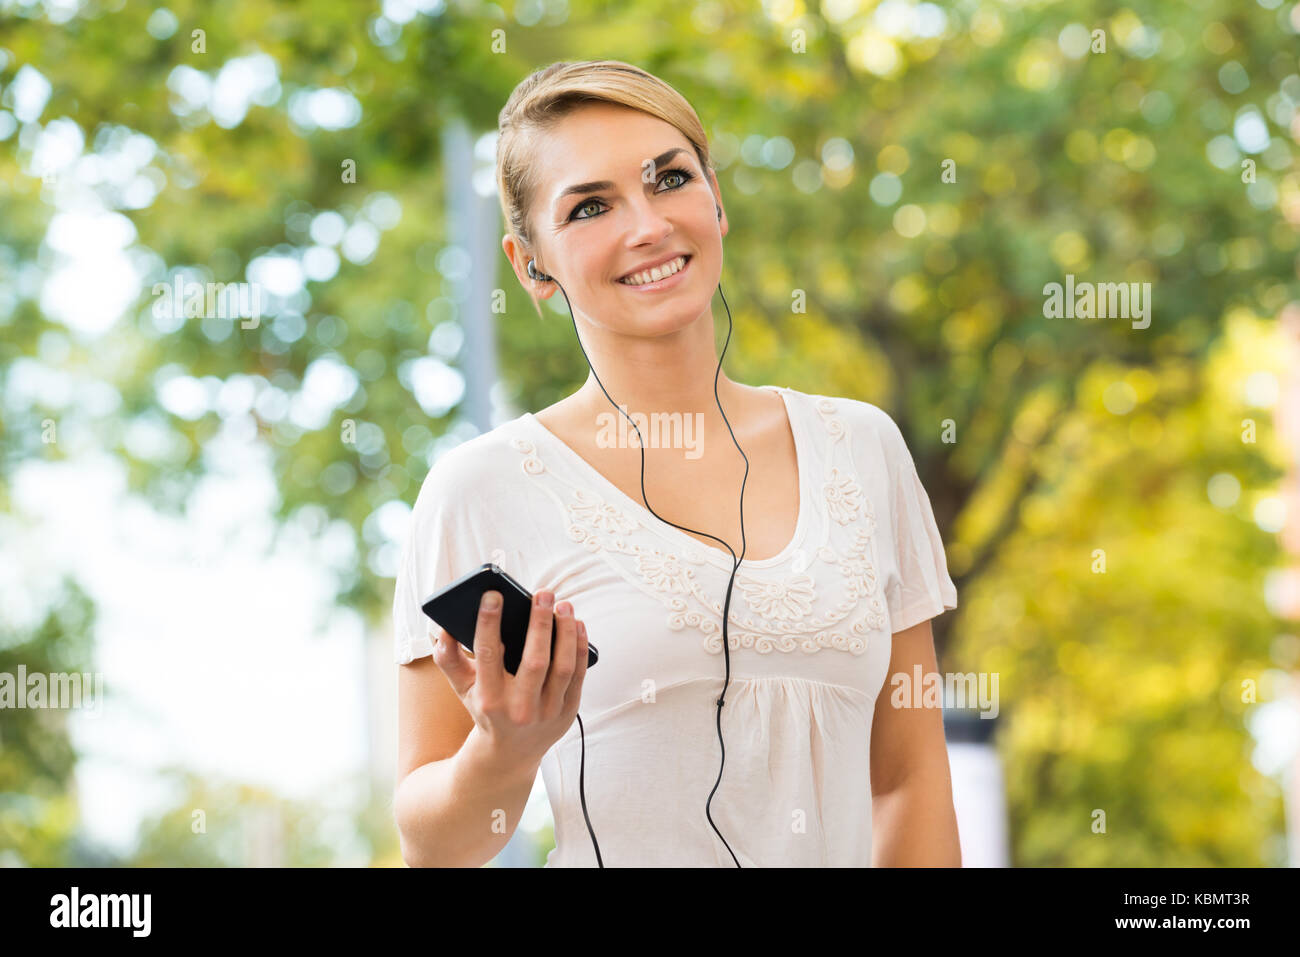 Smiling young woman listening to music through headphones using mobile phone Stock Photo